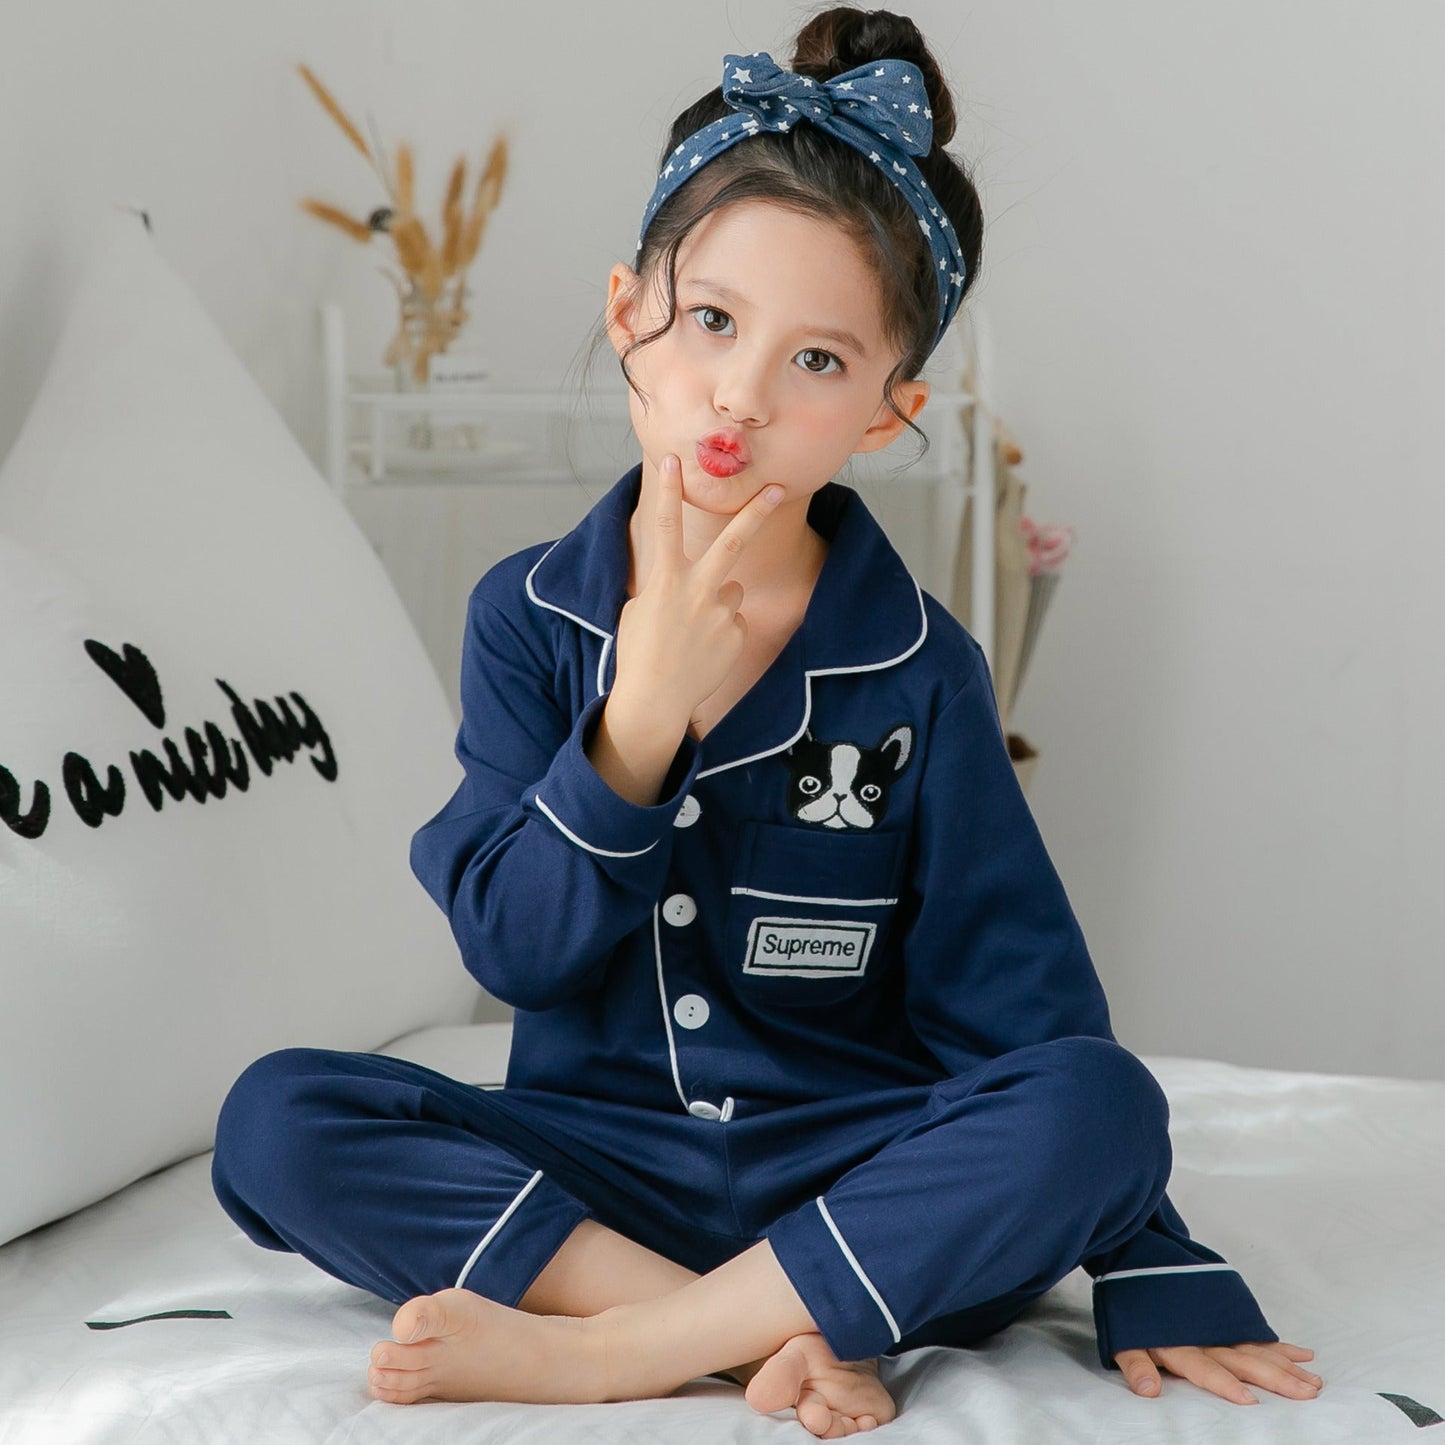 Printed Cotton Night Suit For Girl's | GlamzLife